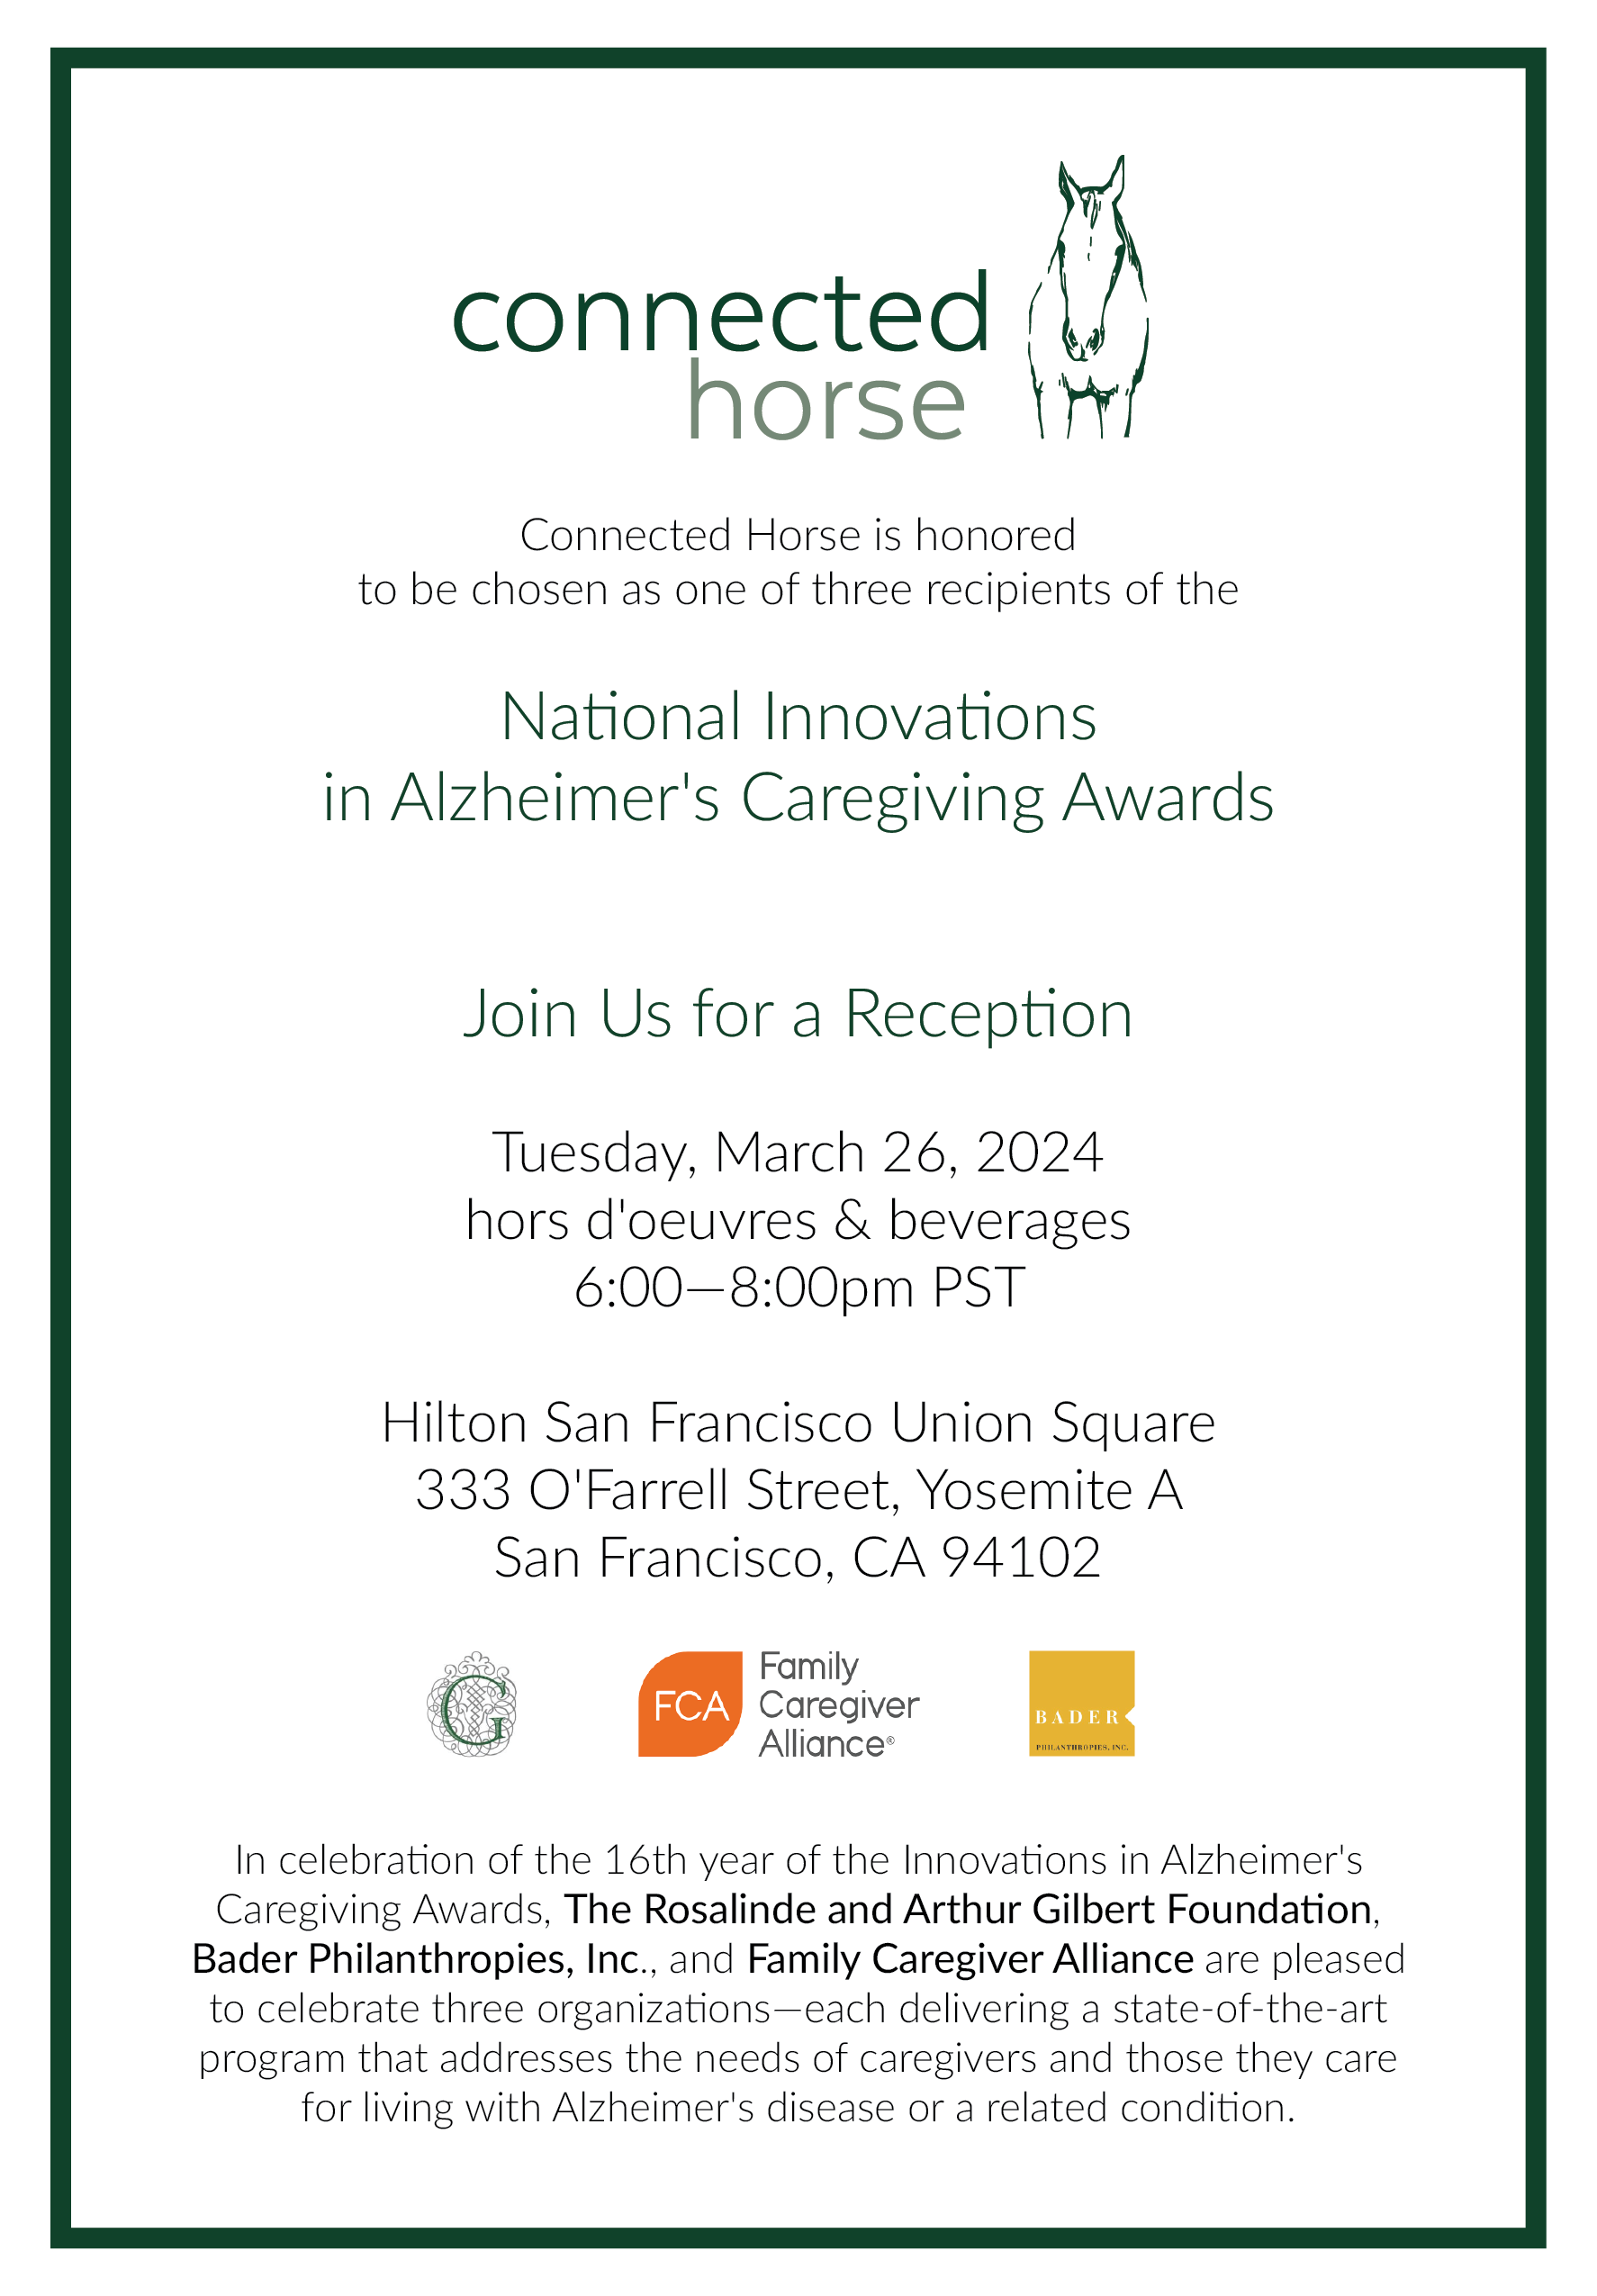 Invitation to Reception for National Innovations in Alzheimer's Caregiving Awards on Tuesday, March 26, 2024